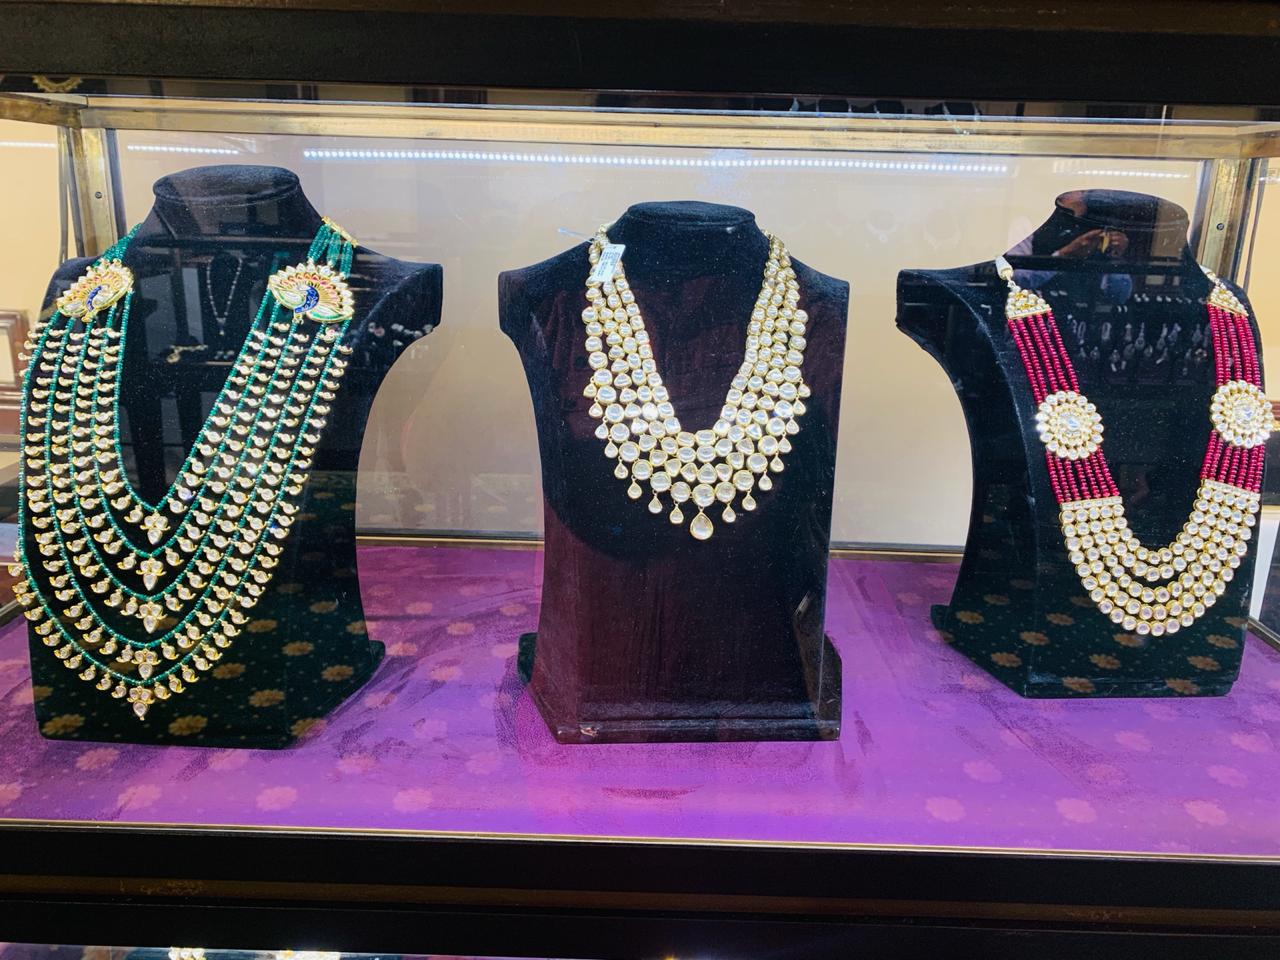 Jaipur Jewels are conducting an exhibition in the City of Joy